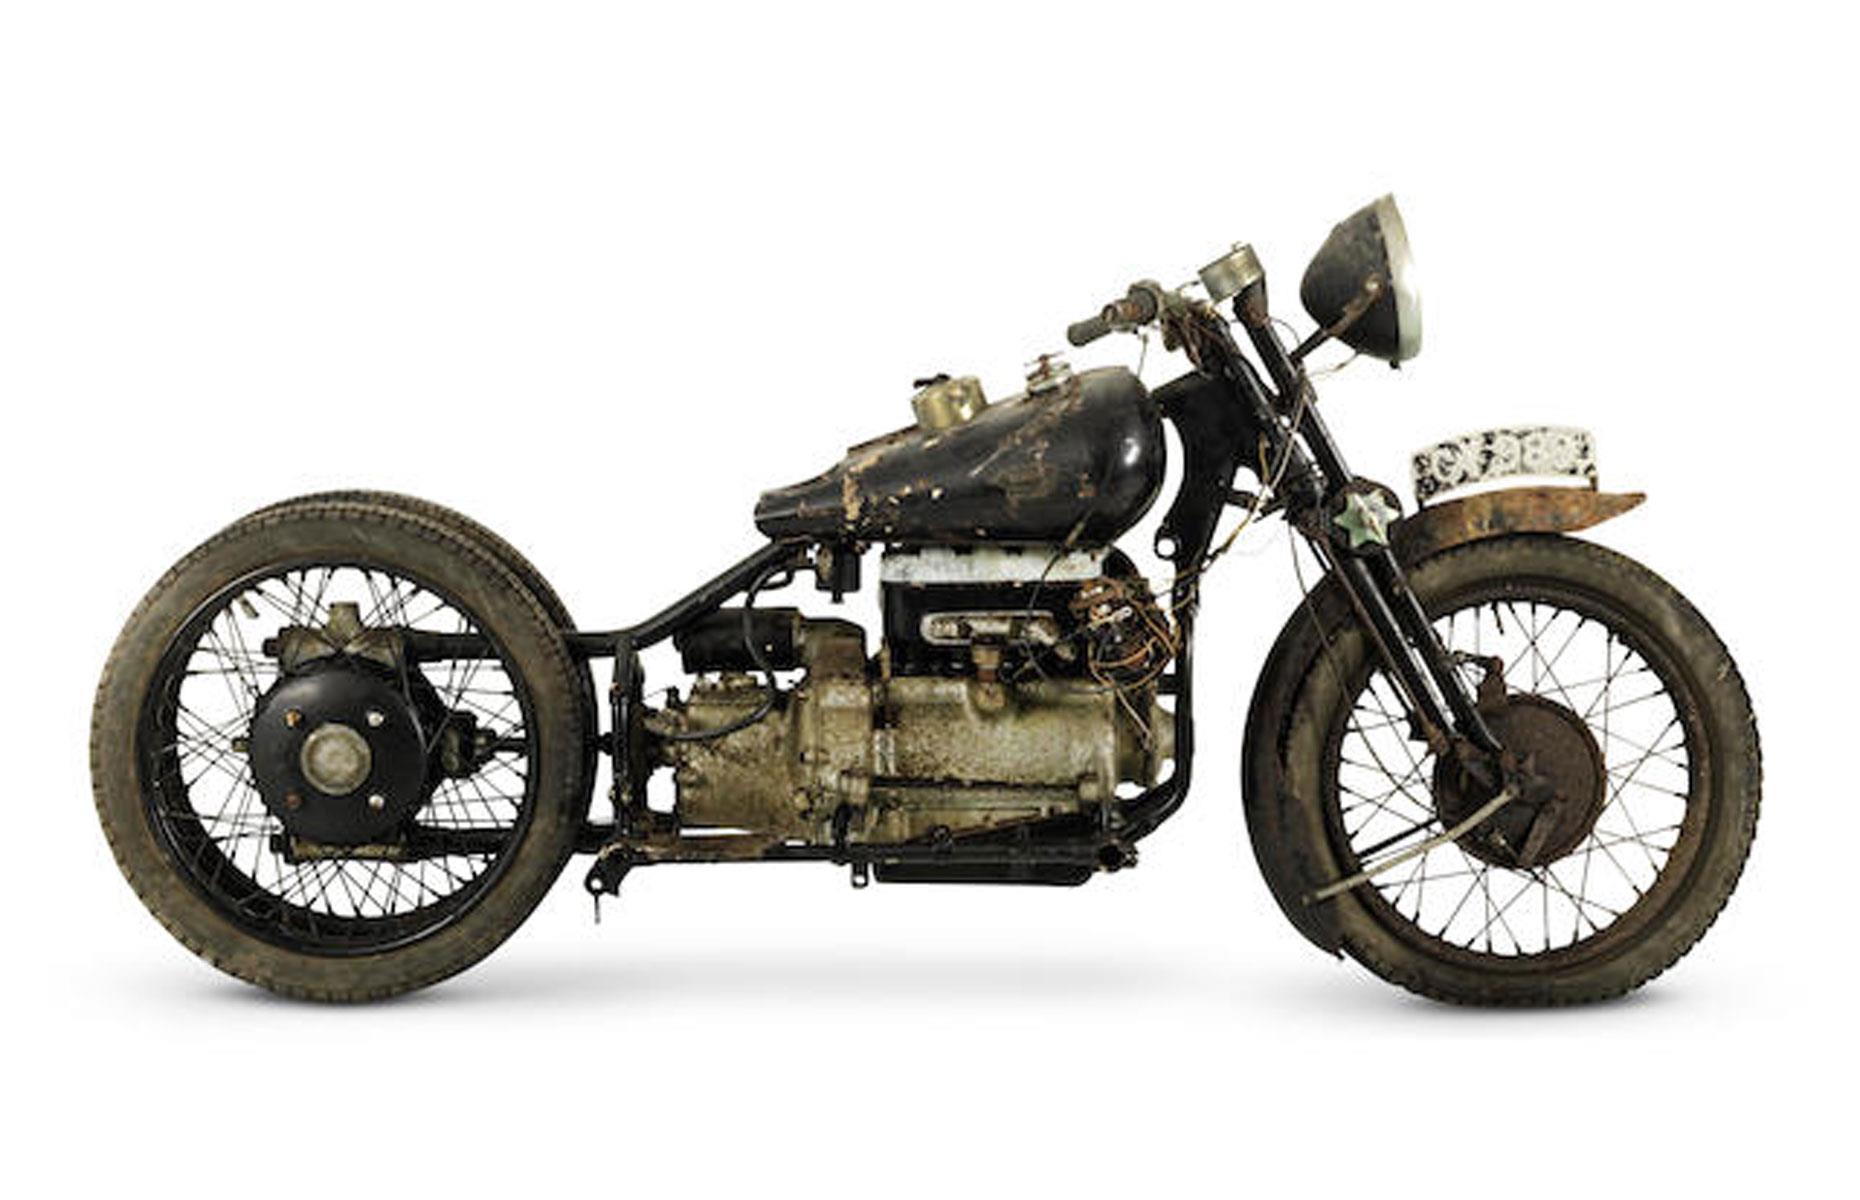 1932 Brough Superior 800cc BS4 motorcycle: $436,800 (£331.9k)